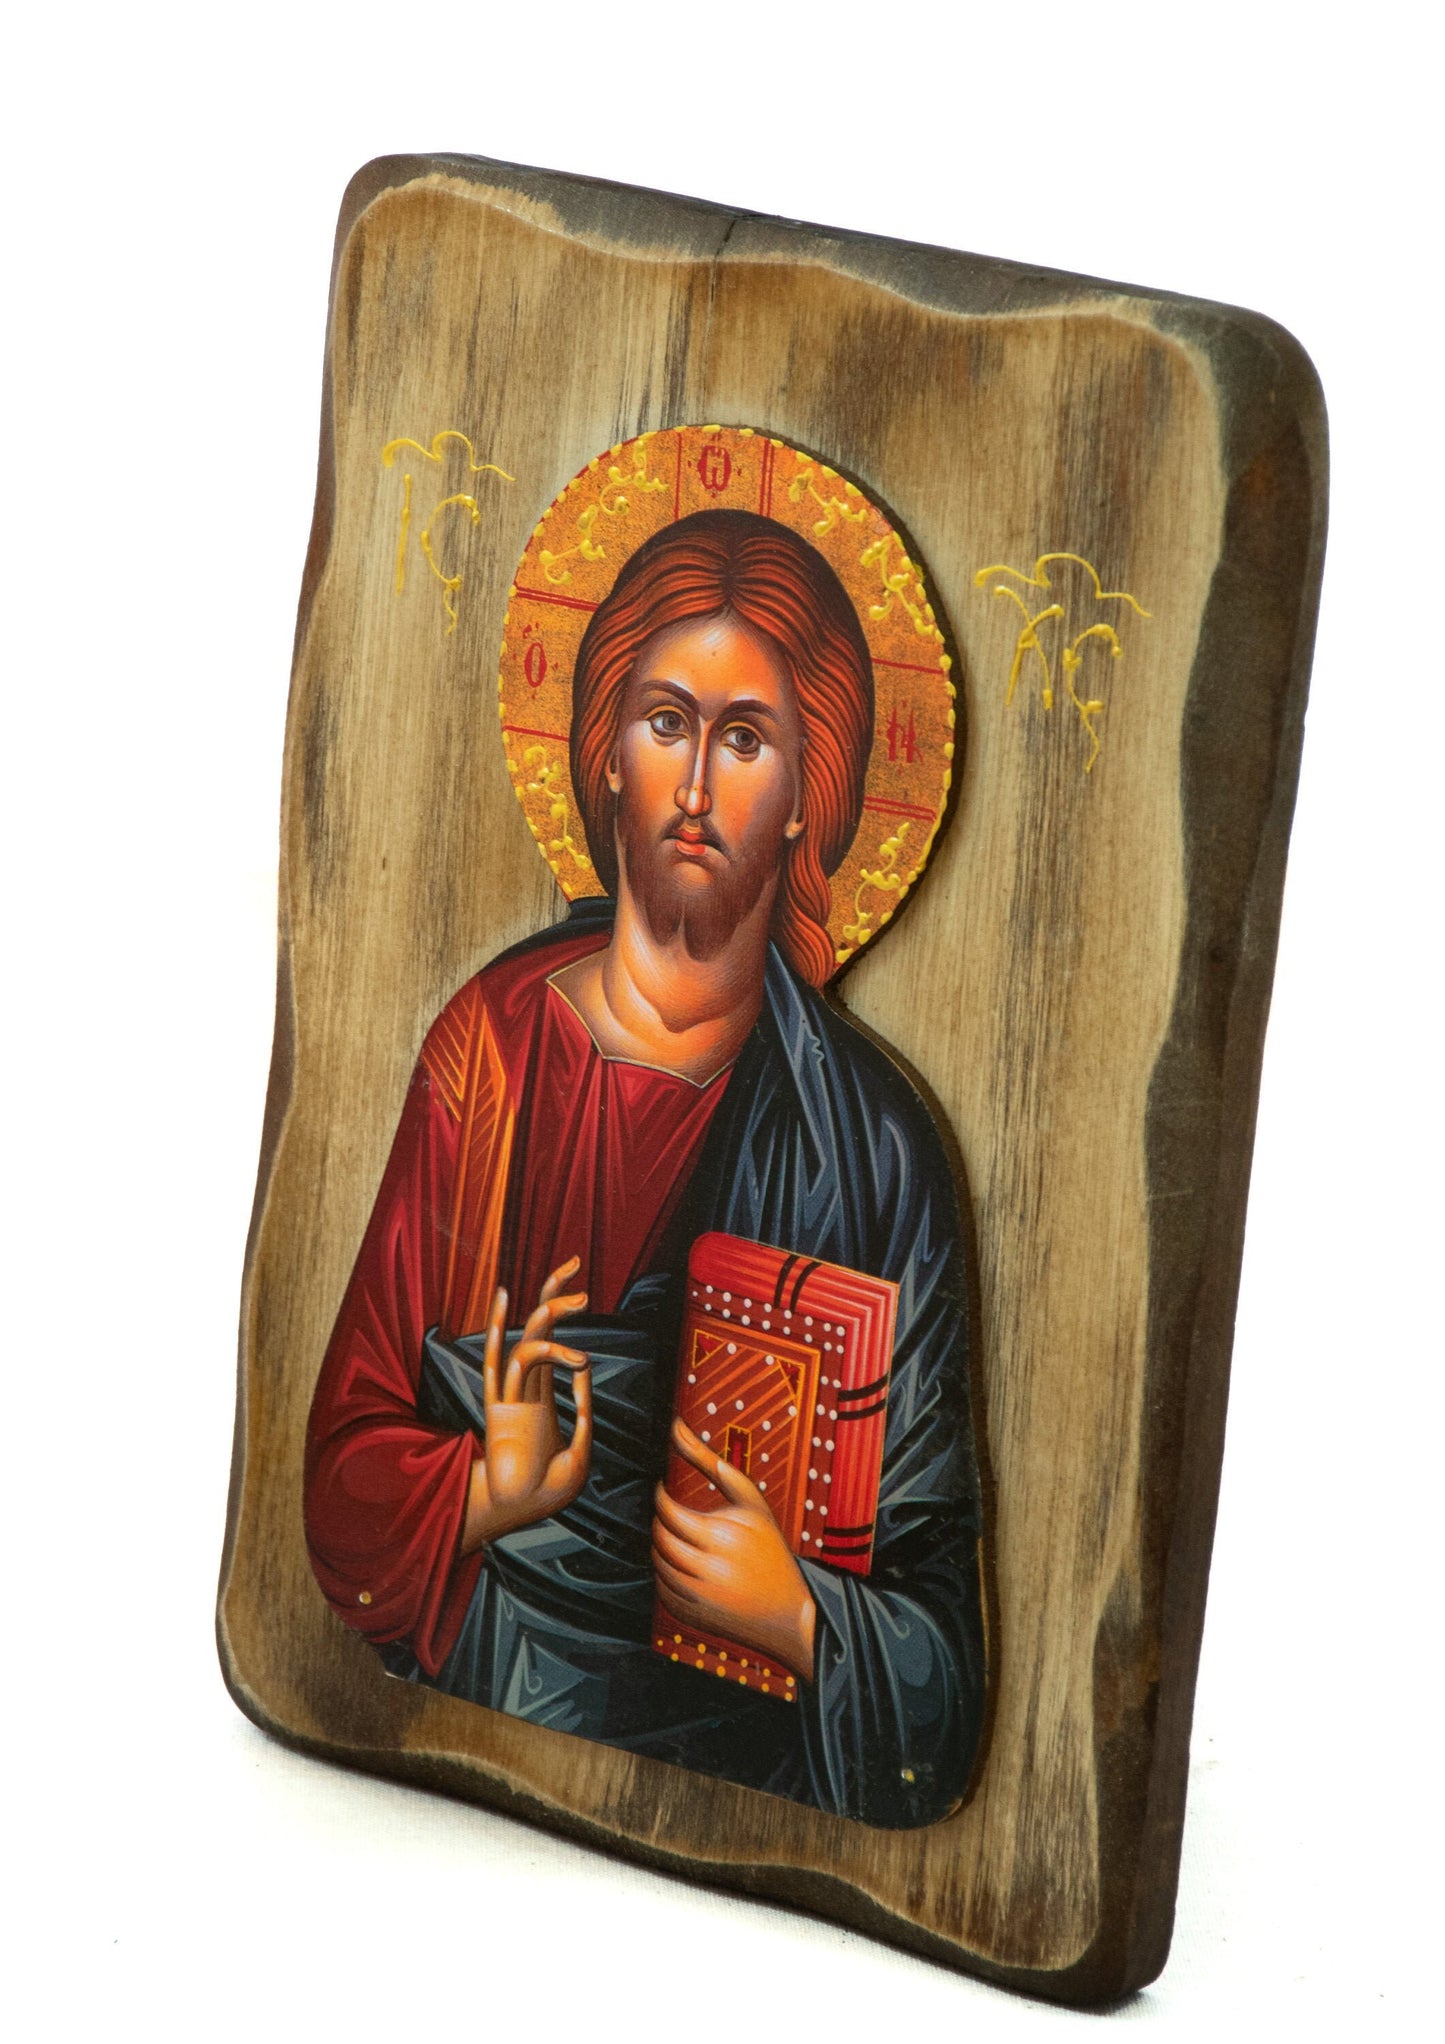 Jesus Christ icon, Handmade Greek Orthodox icon of our Lord, Byzantine art wall hanging on wood plaque, religious home decor TheHolyArt